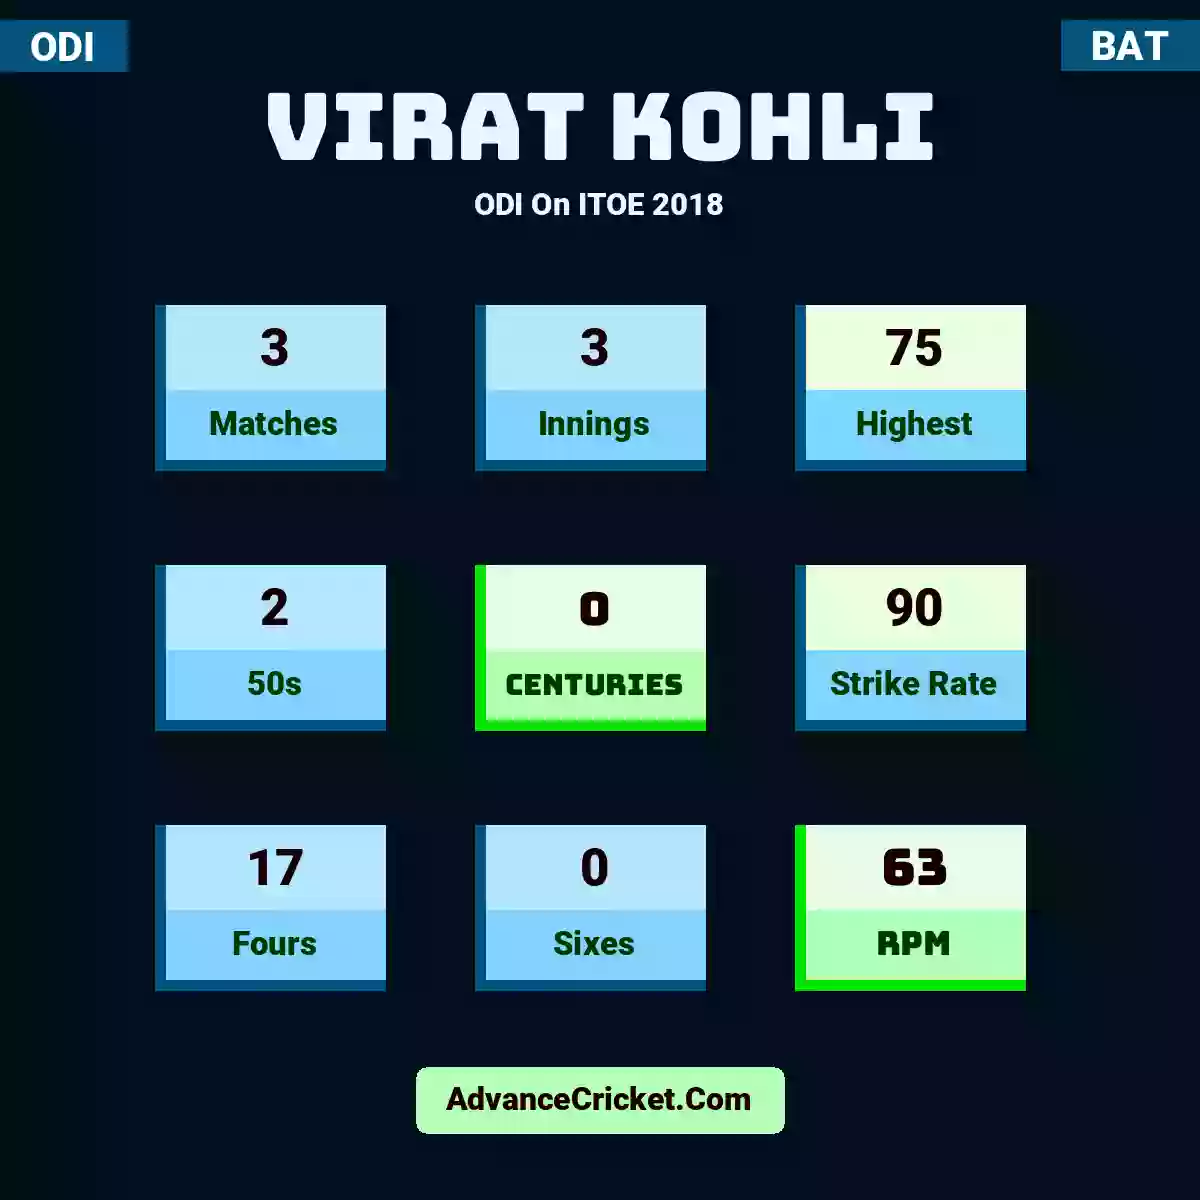 Virat Kohli ODI  On ITOE 2018, Virat Kohli played 3 matches, scored 75 runs as highest, 2 half-centuries, and 0 centuries, with a strike rate of 90. V.Kohli hit 17 fours and 0 sixes, with an RPM of 63.